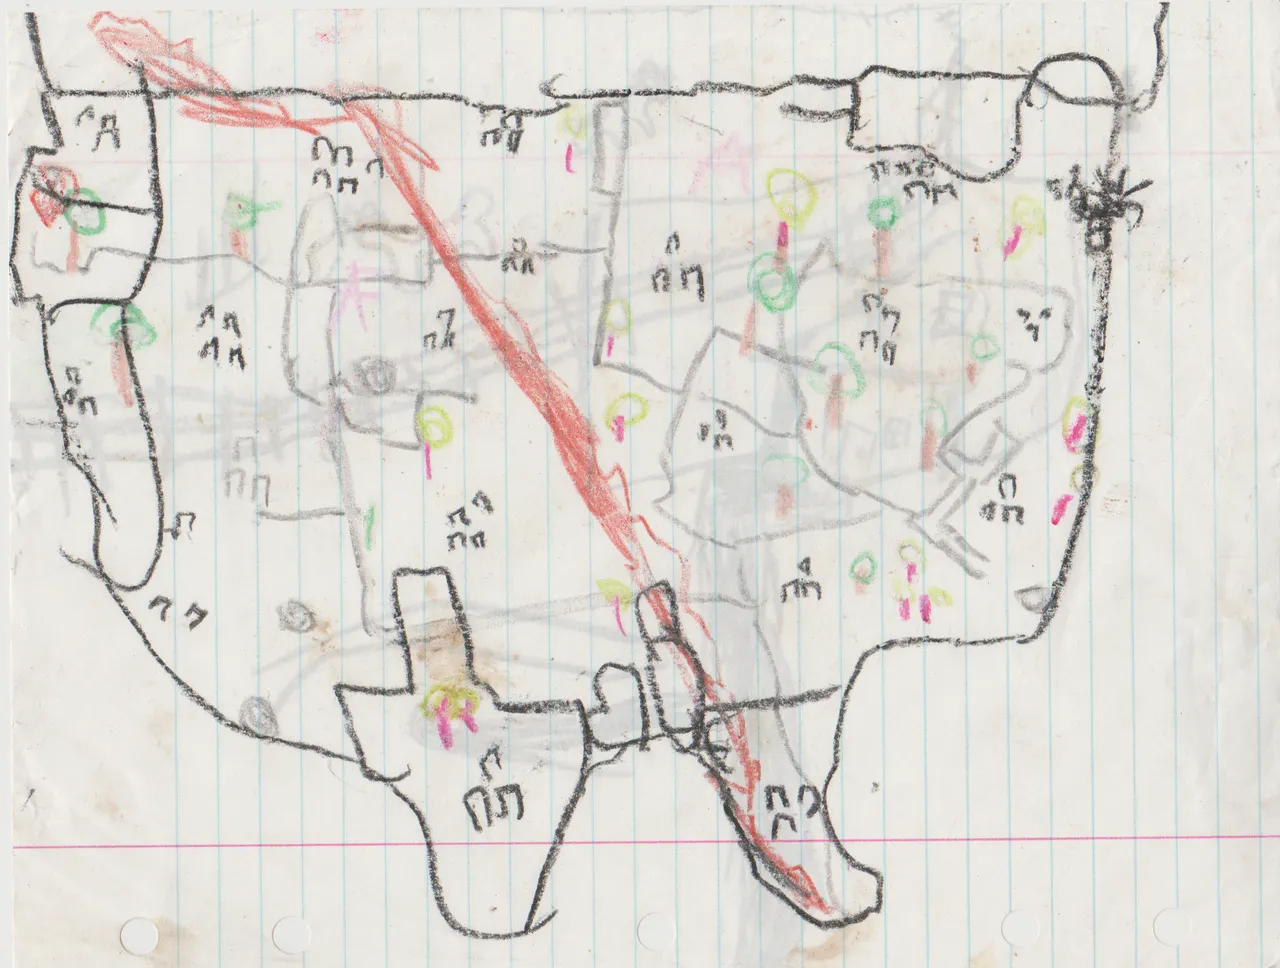 1993 maybe - USA map and house, fence, road, horses or other animals, maybe a tree house-1.png